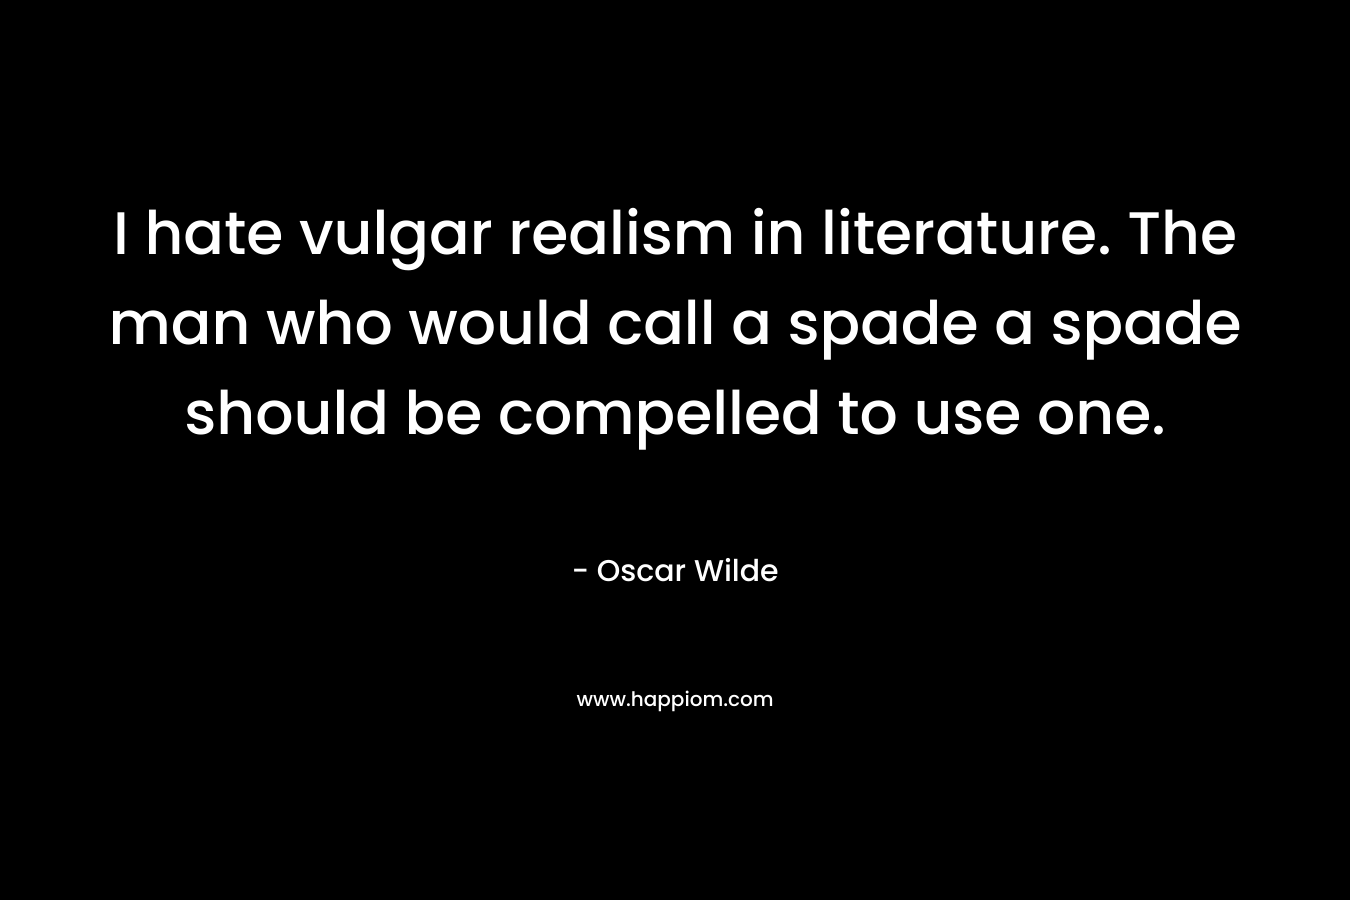 I hate vulgar realism in literature. The man who would call a spade a spade should be compelled to use one. – Oscar Wilde